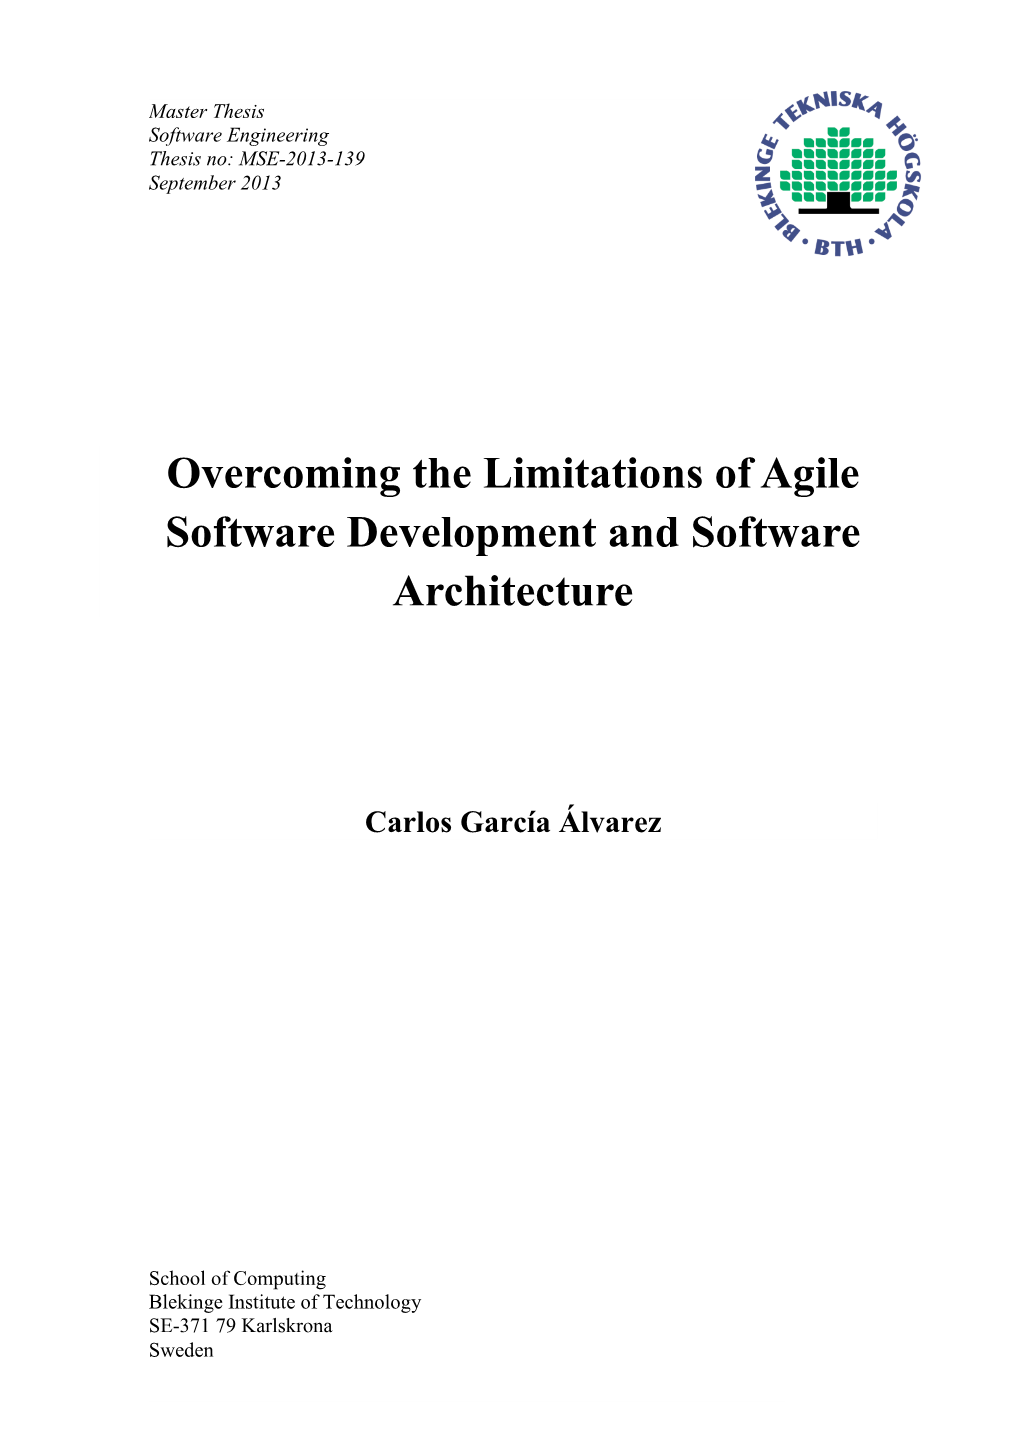 Overcoming the Limitations of Agile Software Development and Software Architecture